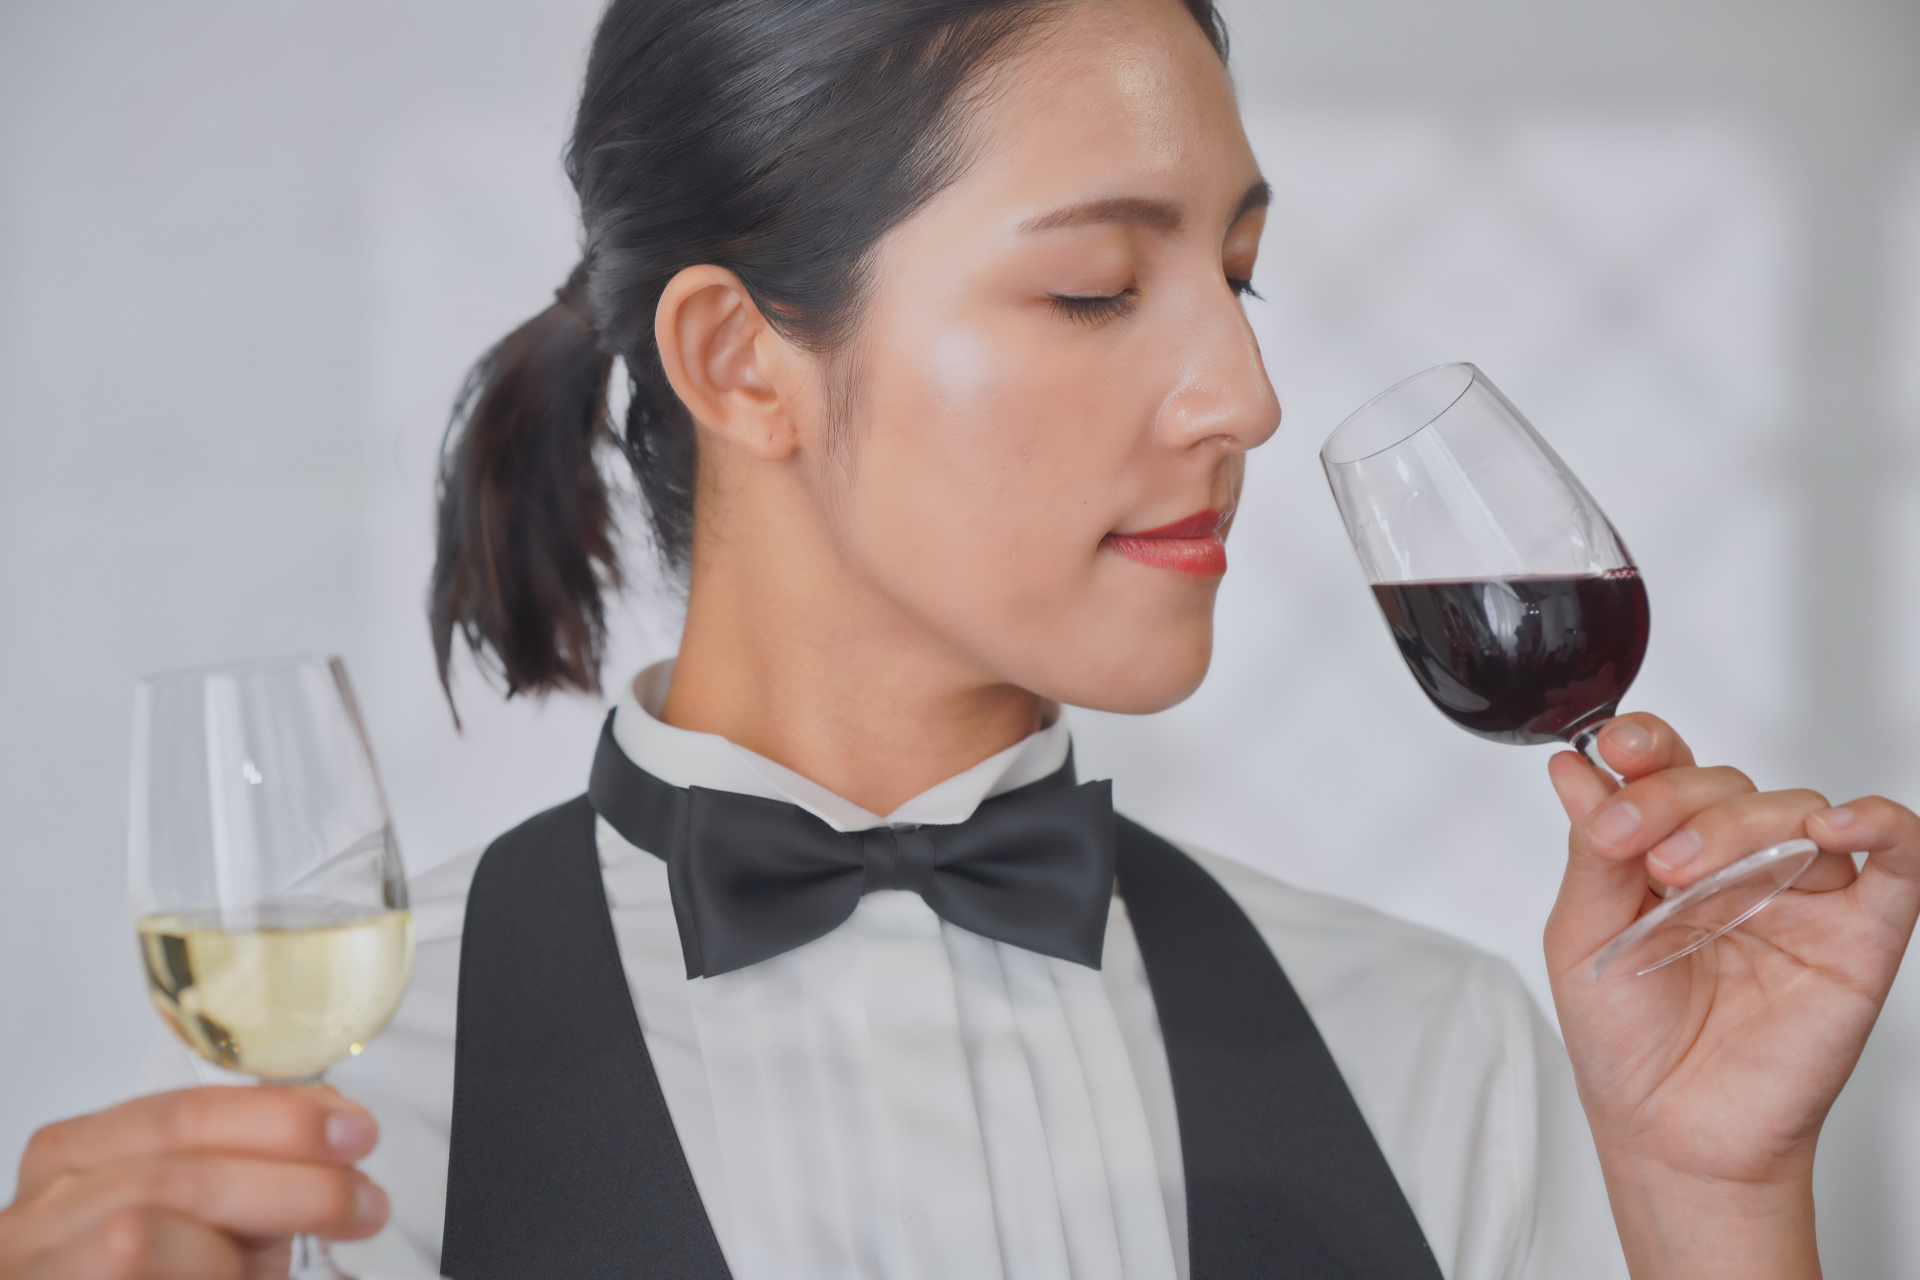 A female sommelier tasting two glasses of wine (red and white)